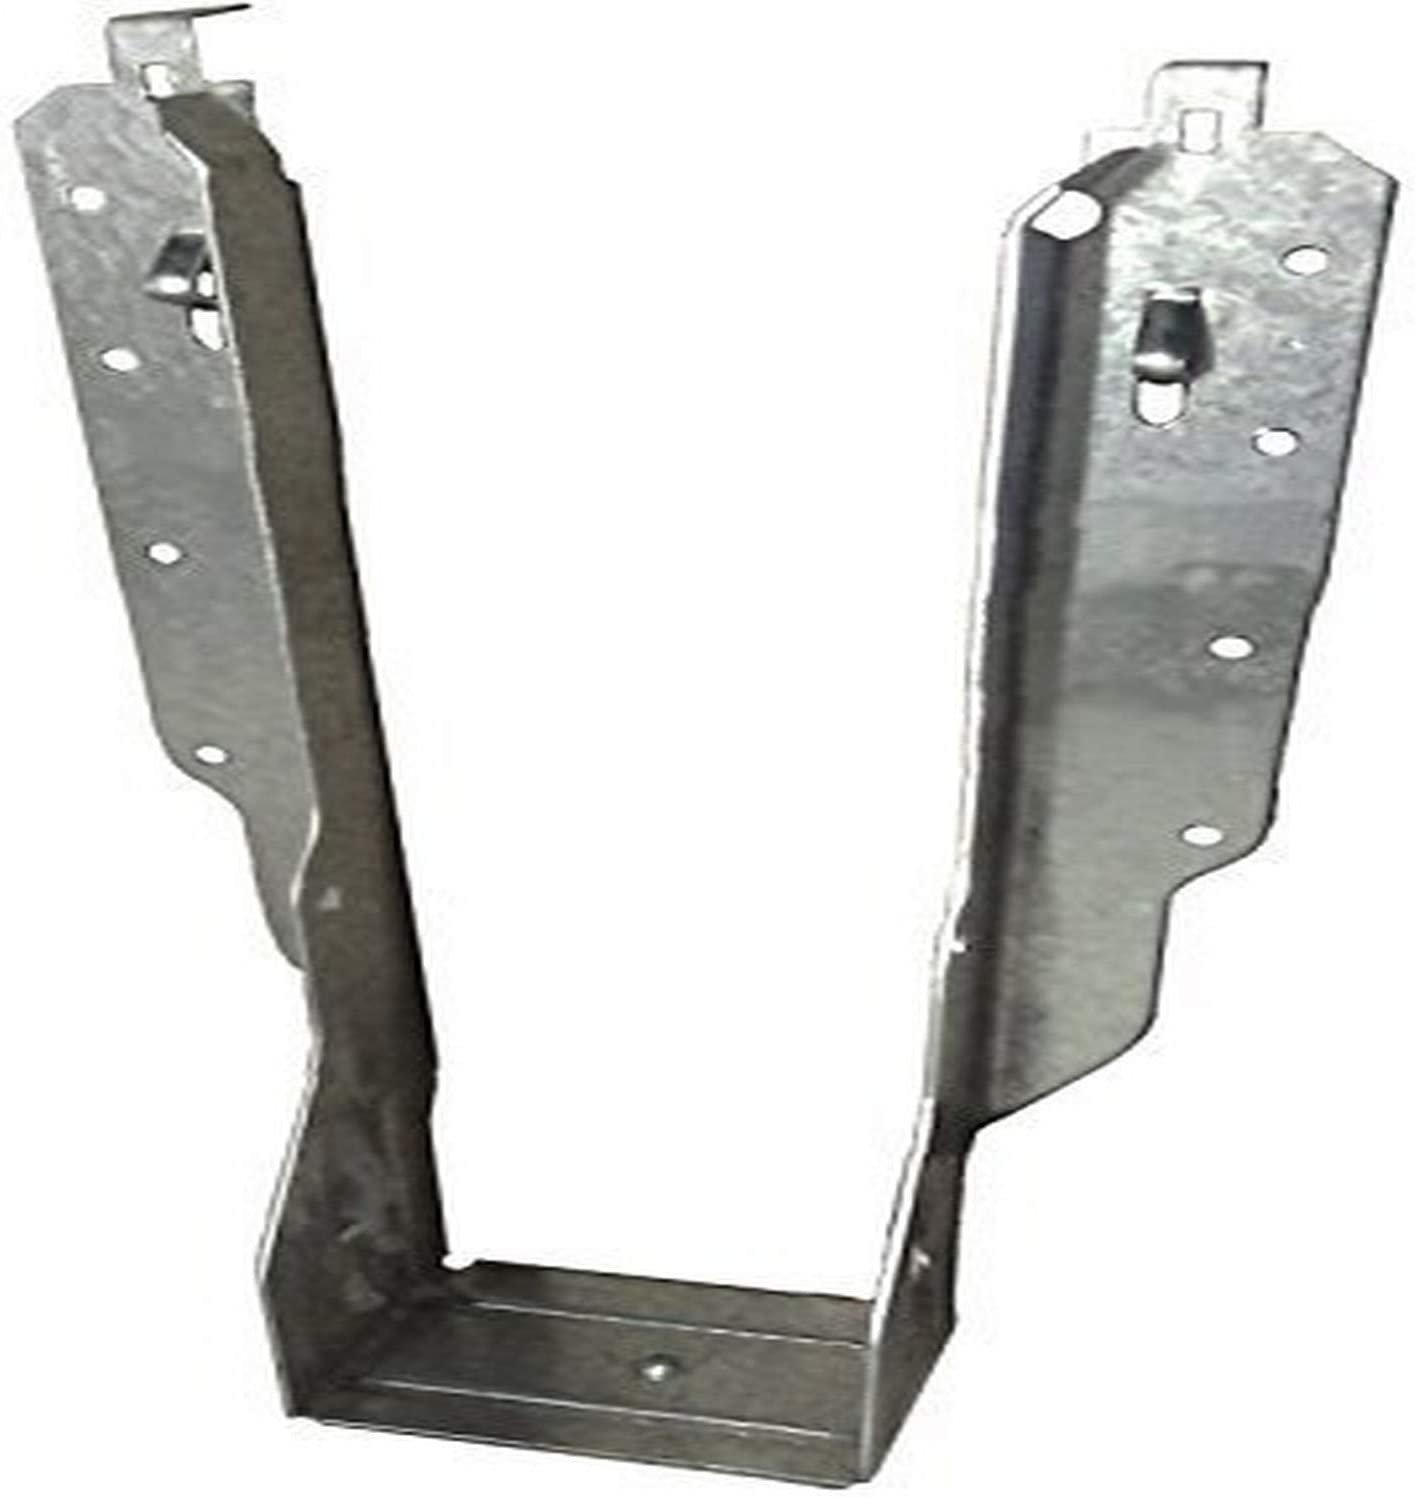 Simpson Strong Tie 9.5-25 IUS2.56/9.5 2-1/2 in. by 9-1/2 in. Face Mount I-Joist Hanger 25-Pack - image 1 of 1